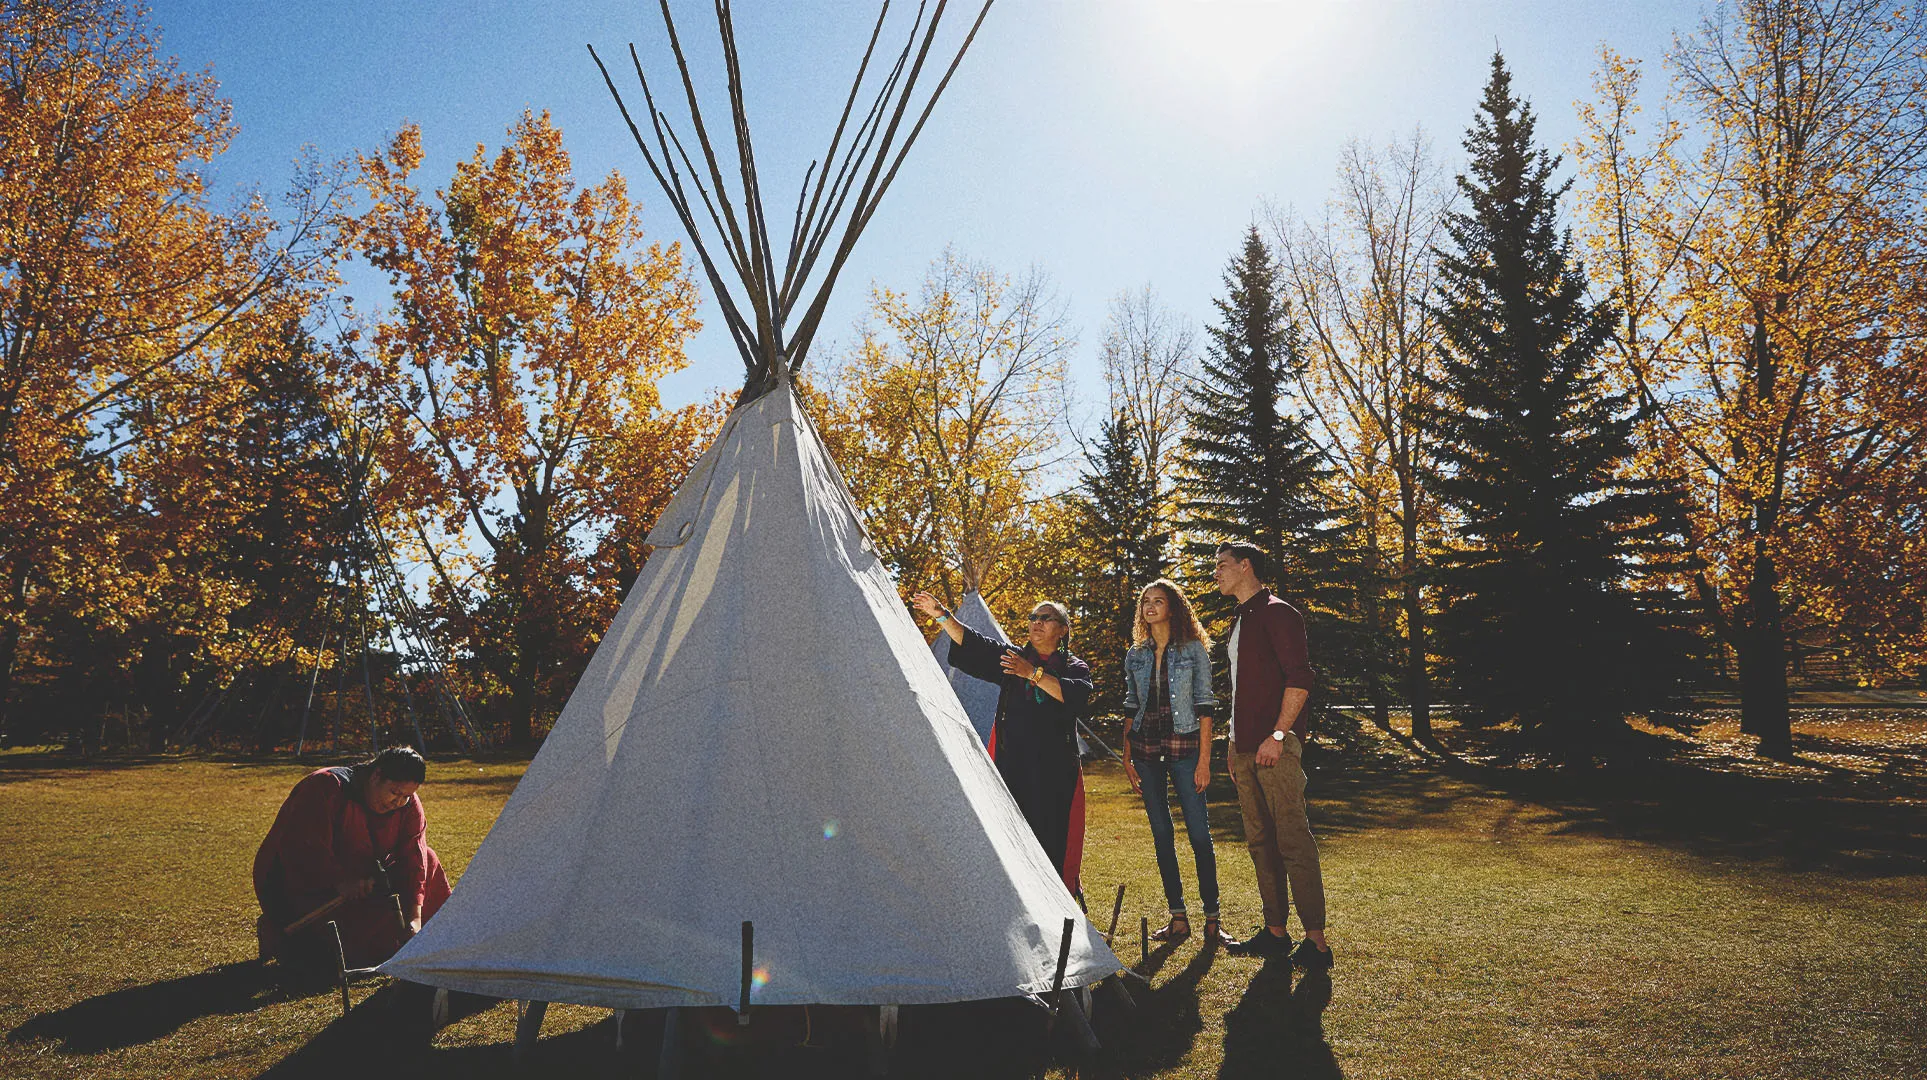 People learning how to set up a tipi at Heritage Park